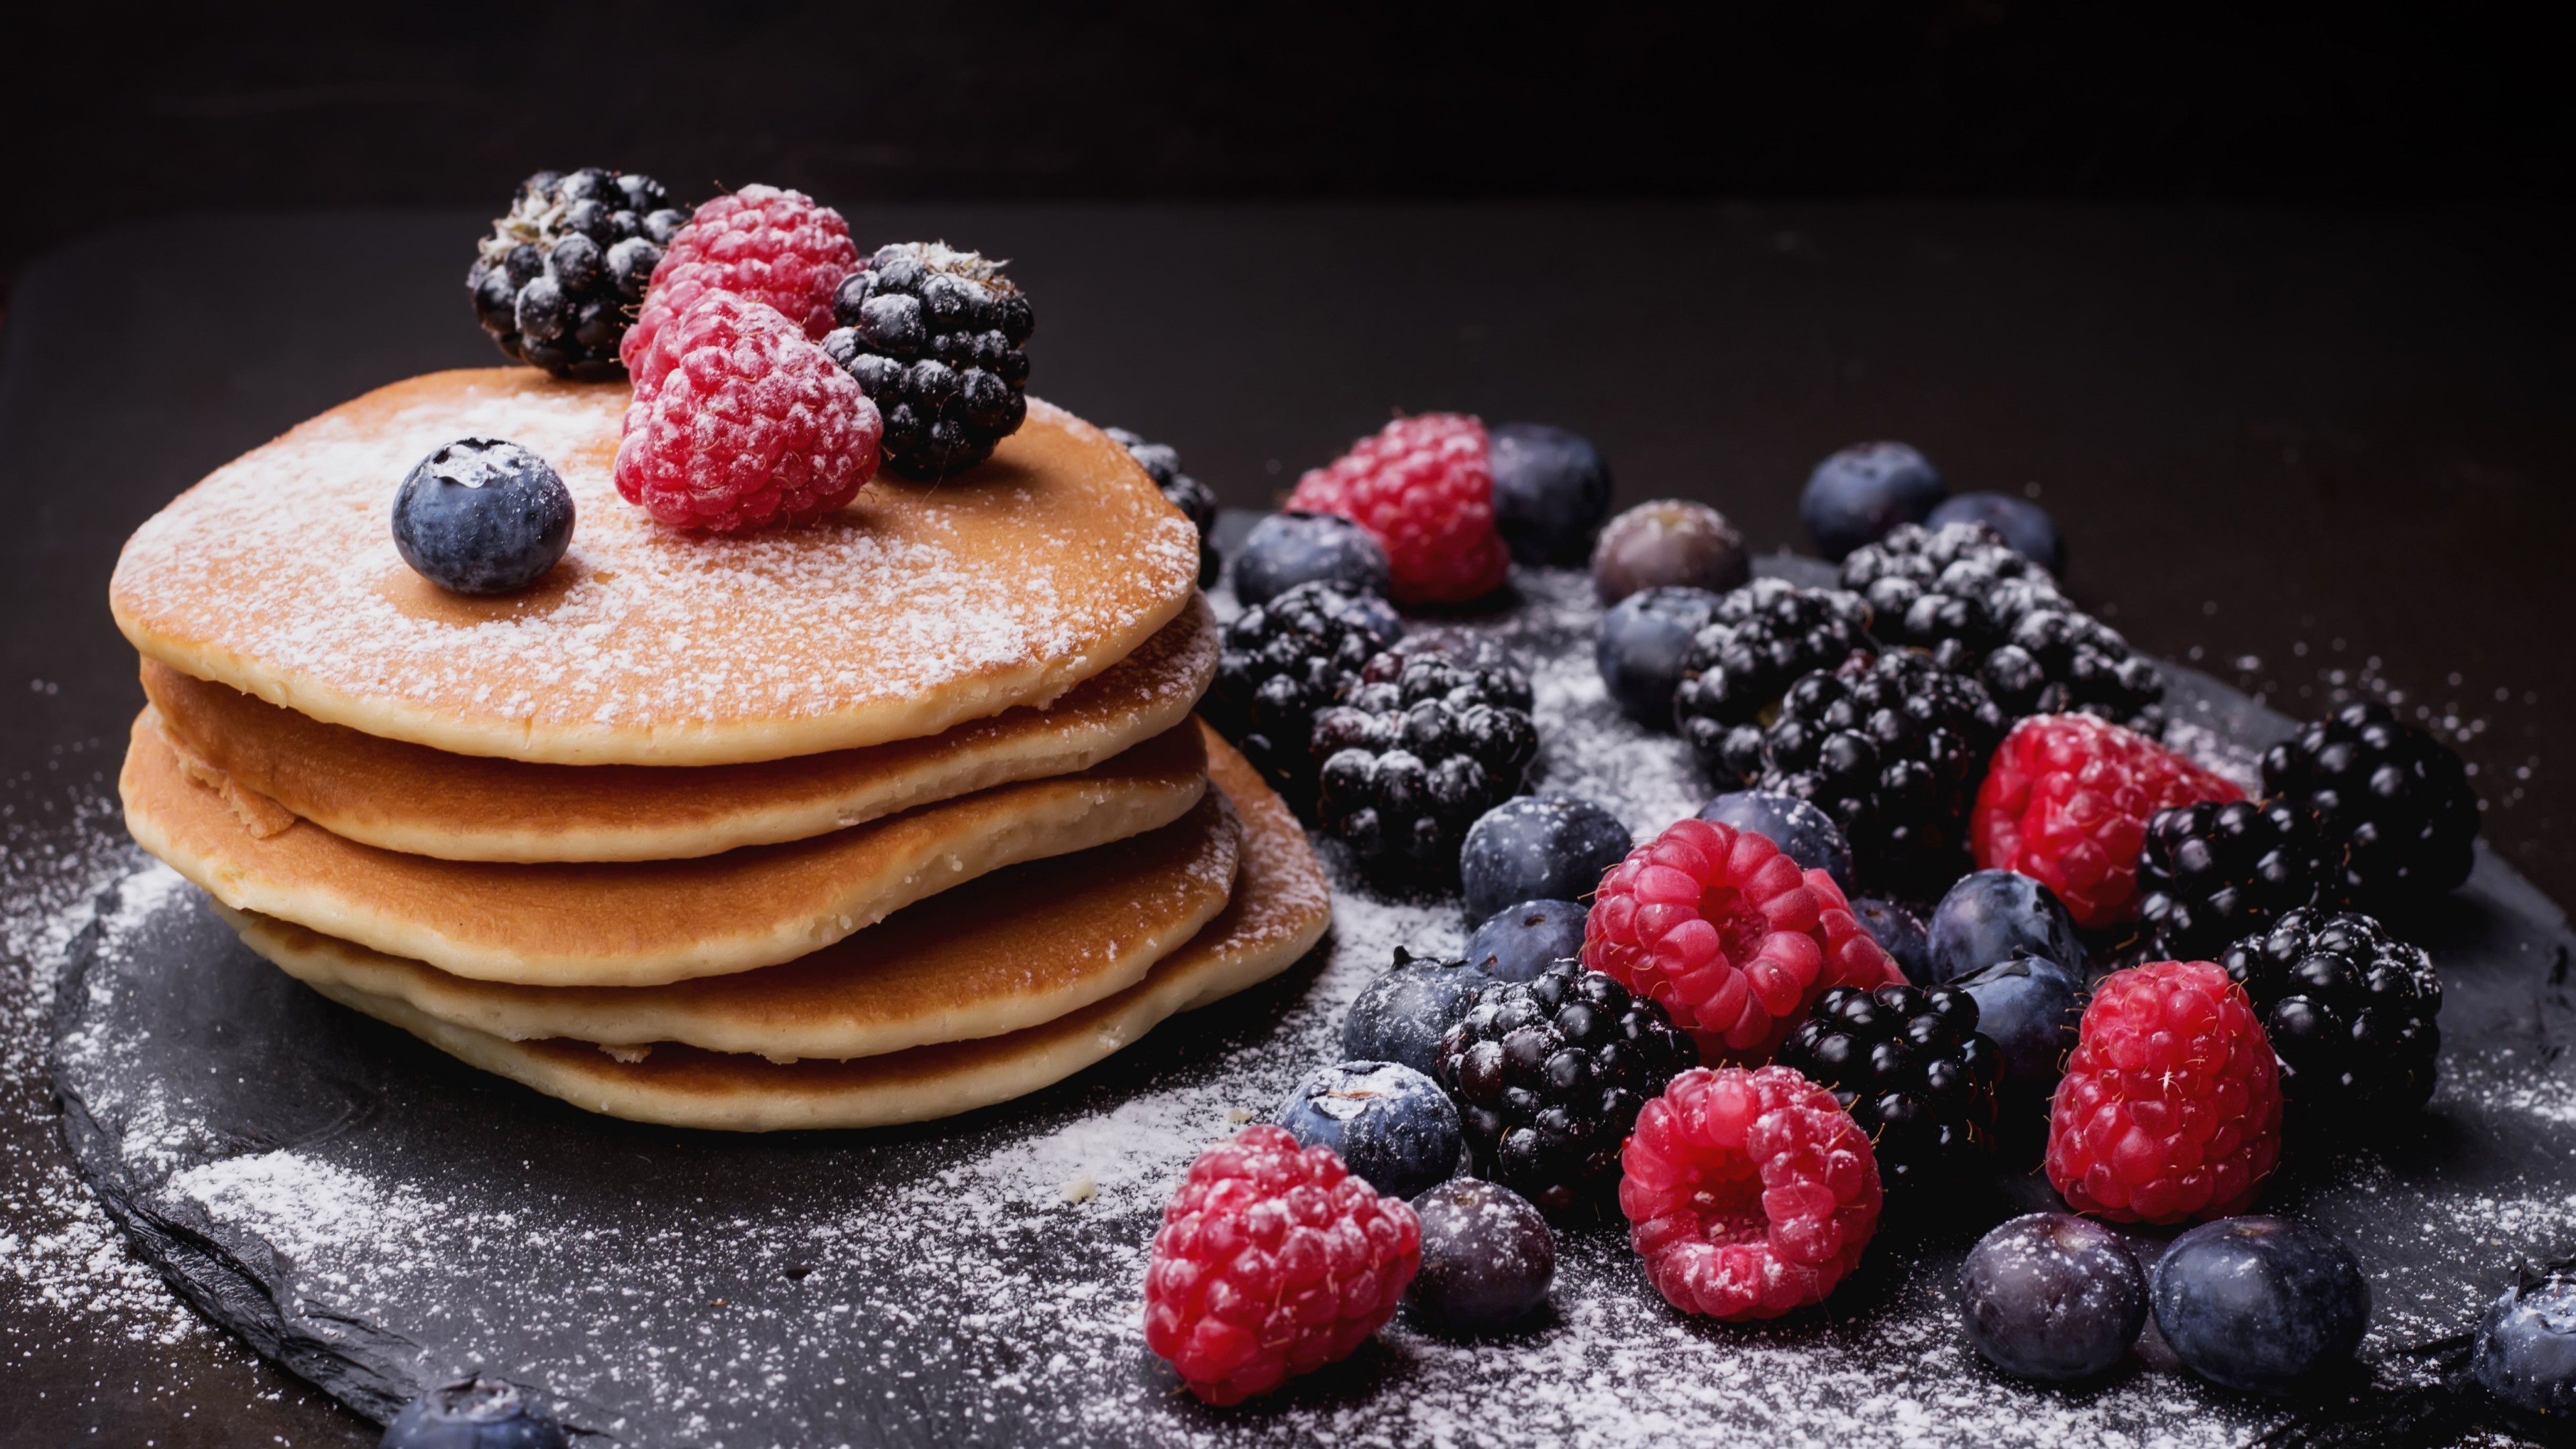 Mouthwatering pancake, Berry medley, Fluffy and delicious, Sensory delight, 3840x2160 4K Desktop